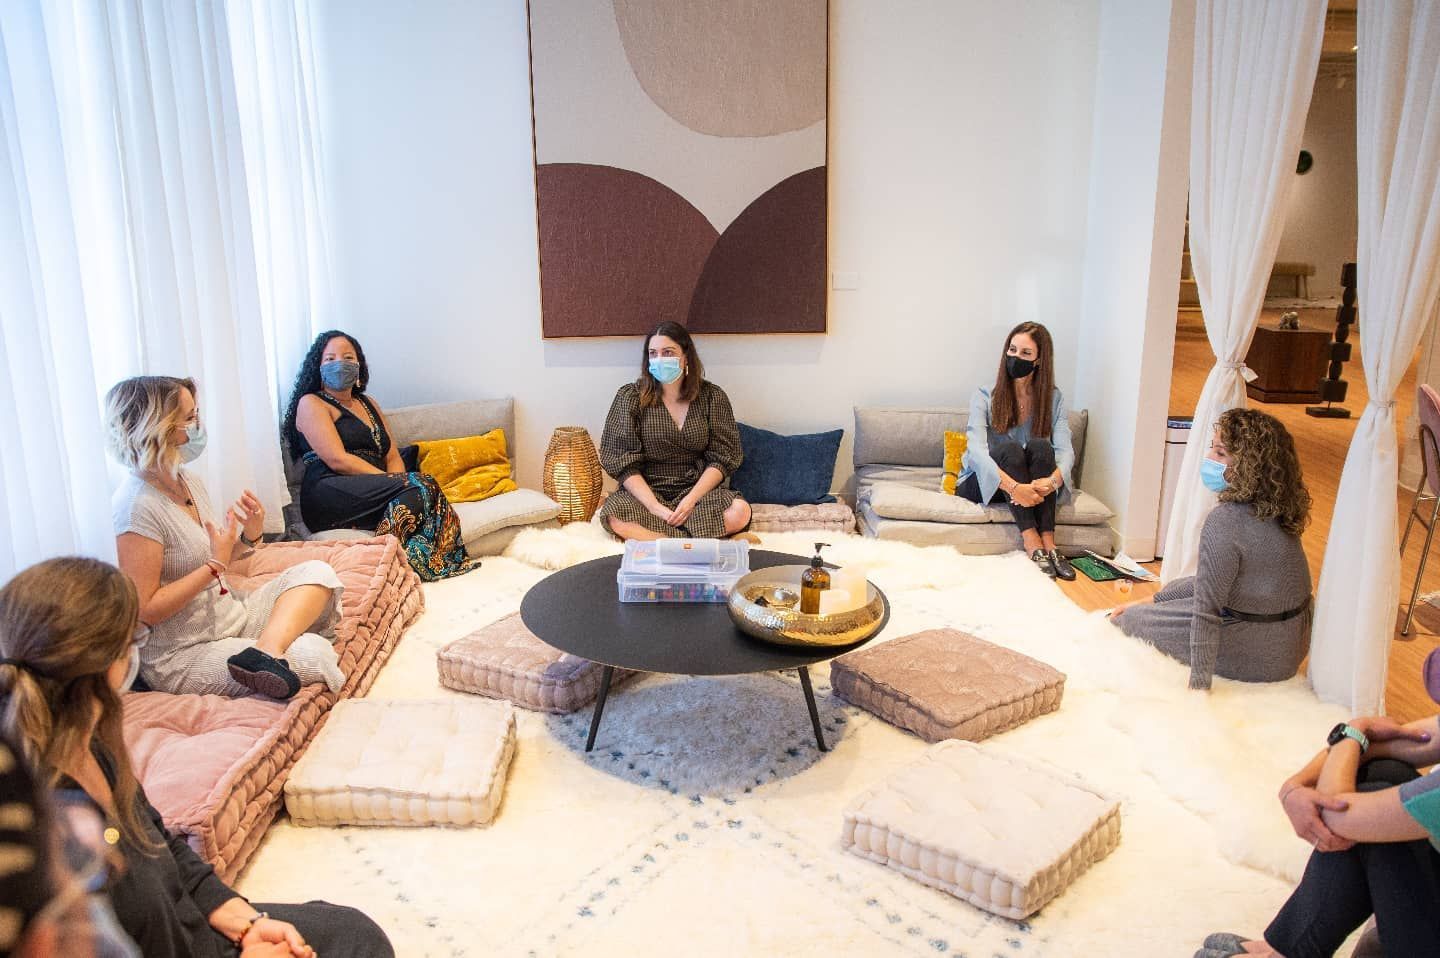 Gallery Photo of Jordan leading a meditation group at Field Trip Health.